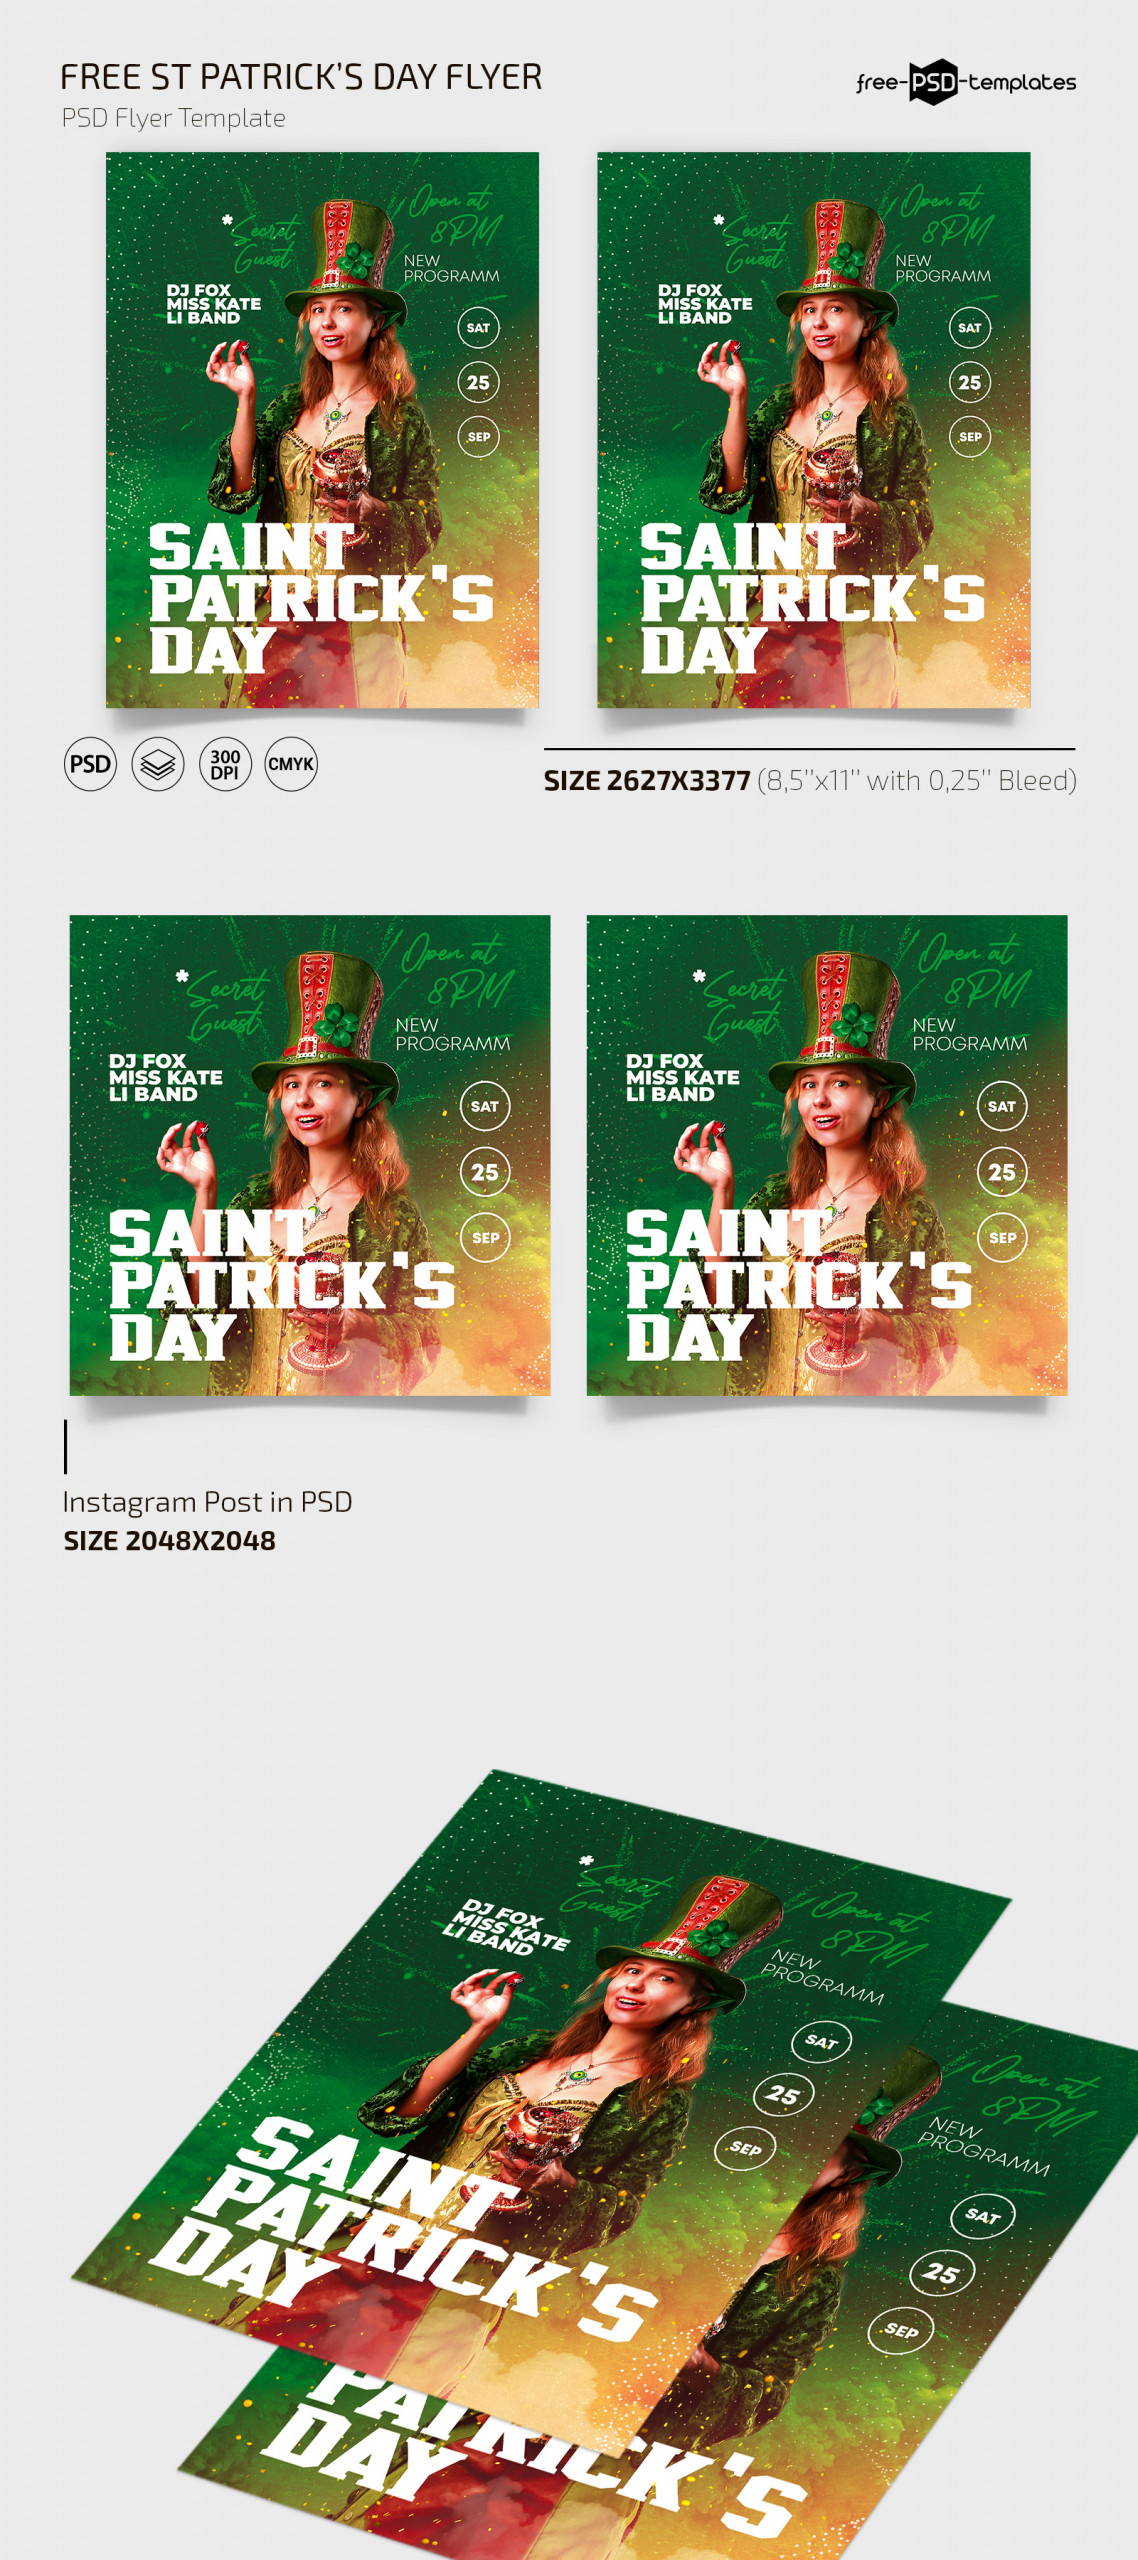 Free St Patrick's Day 2023 Flyer Template PSD